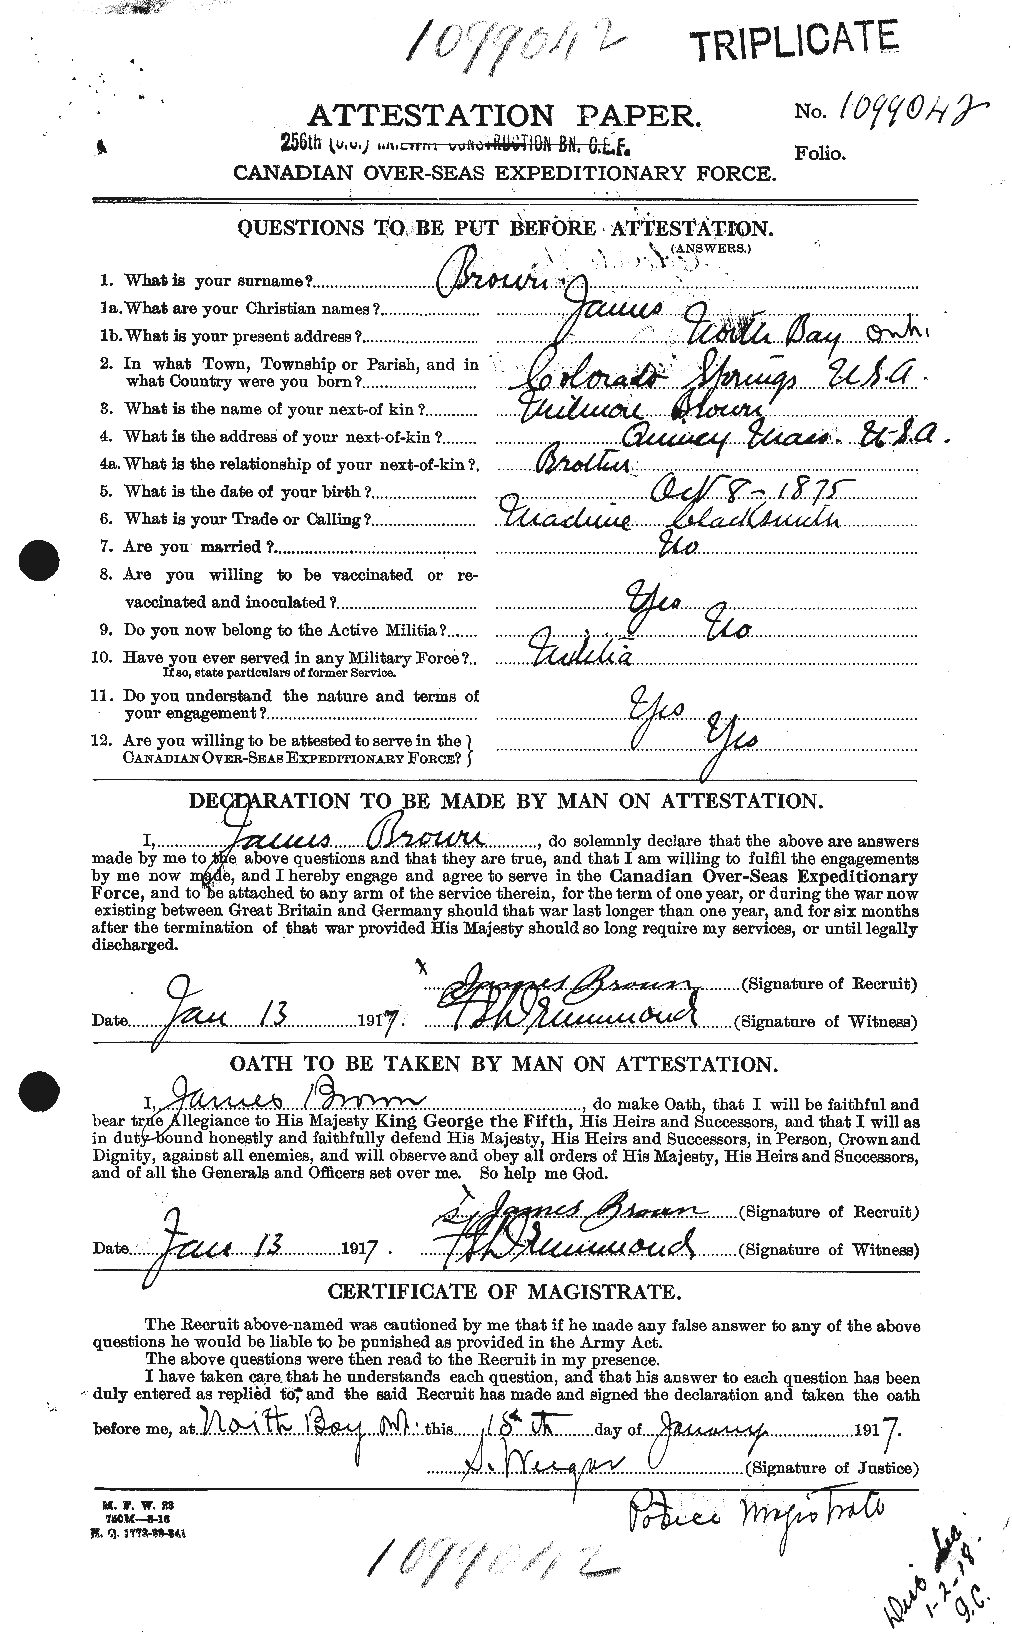 Personnel Records of the First World War - CEF 265738a